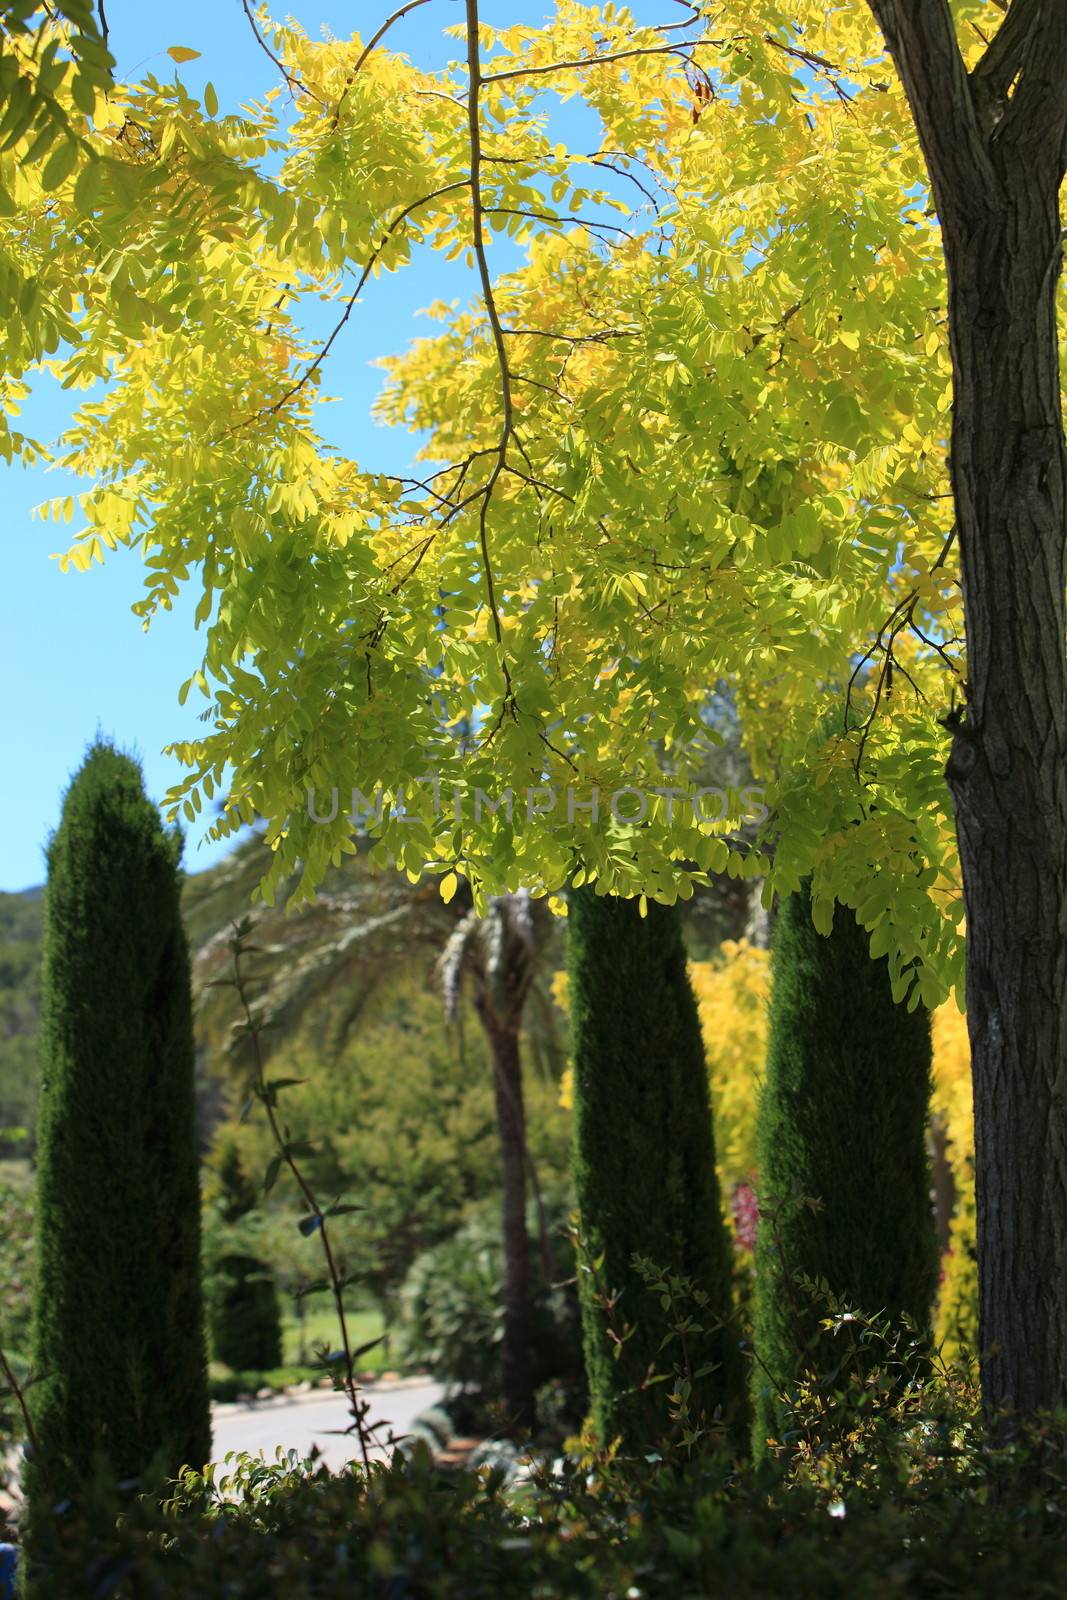 Beautiful yellow foliage on a tree with an avenue of cypresses and palms behind